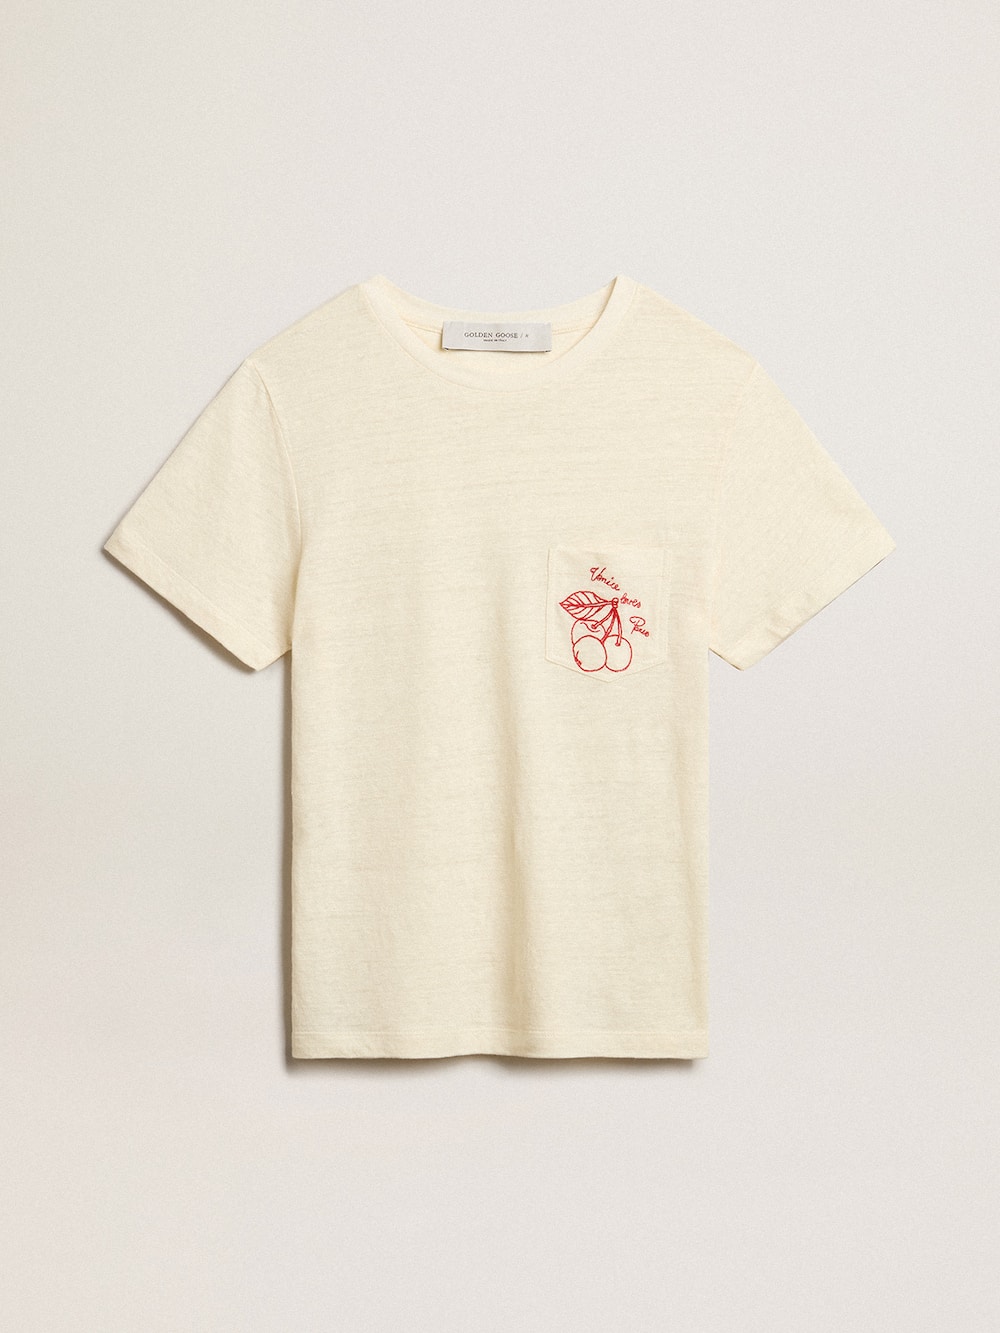 Golden Goose - Women’s cotton T-shirt in aged white with embroidered pocket in 